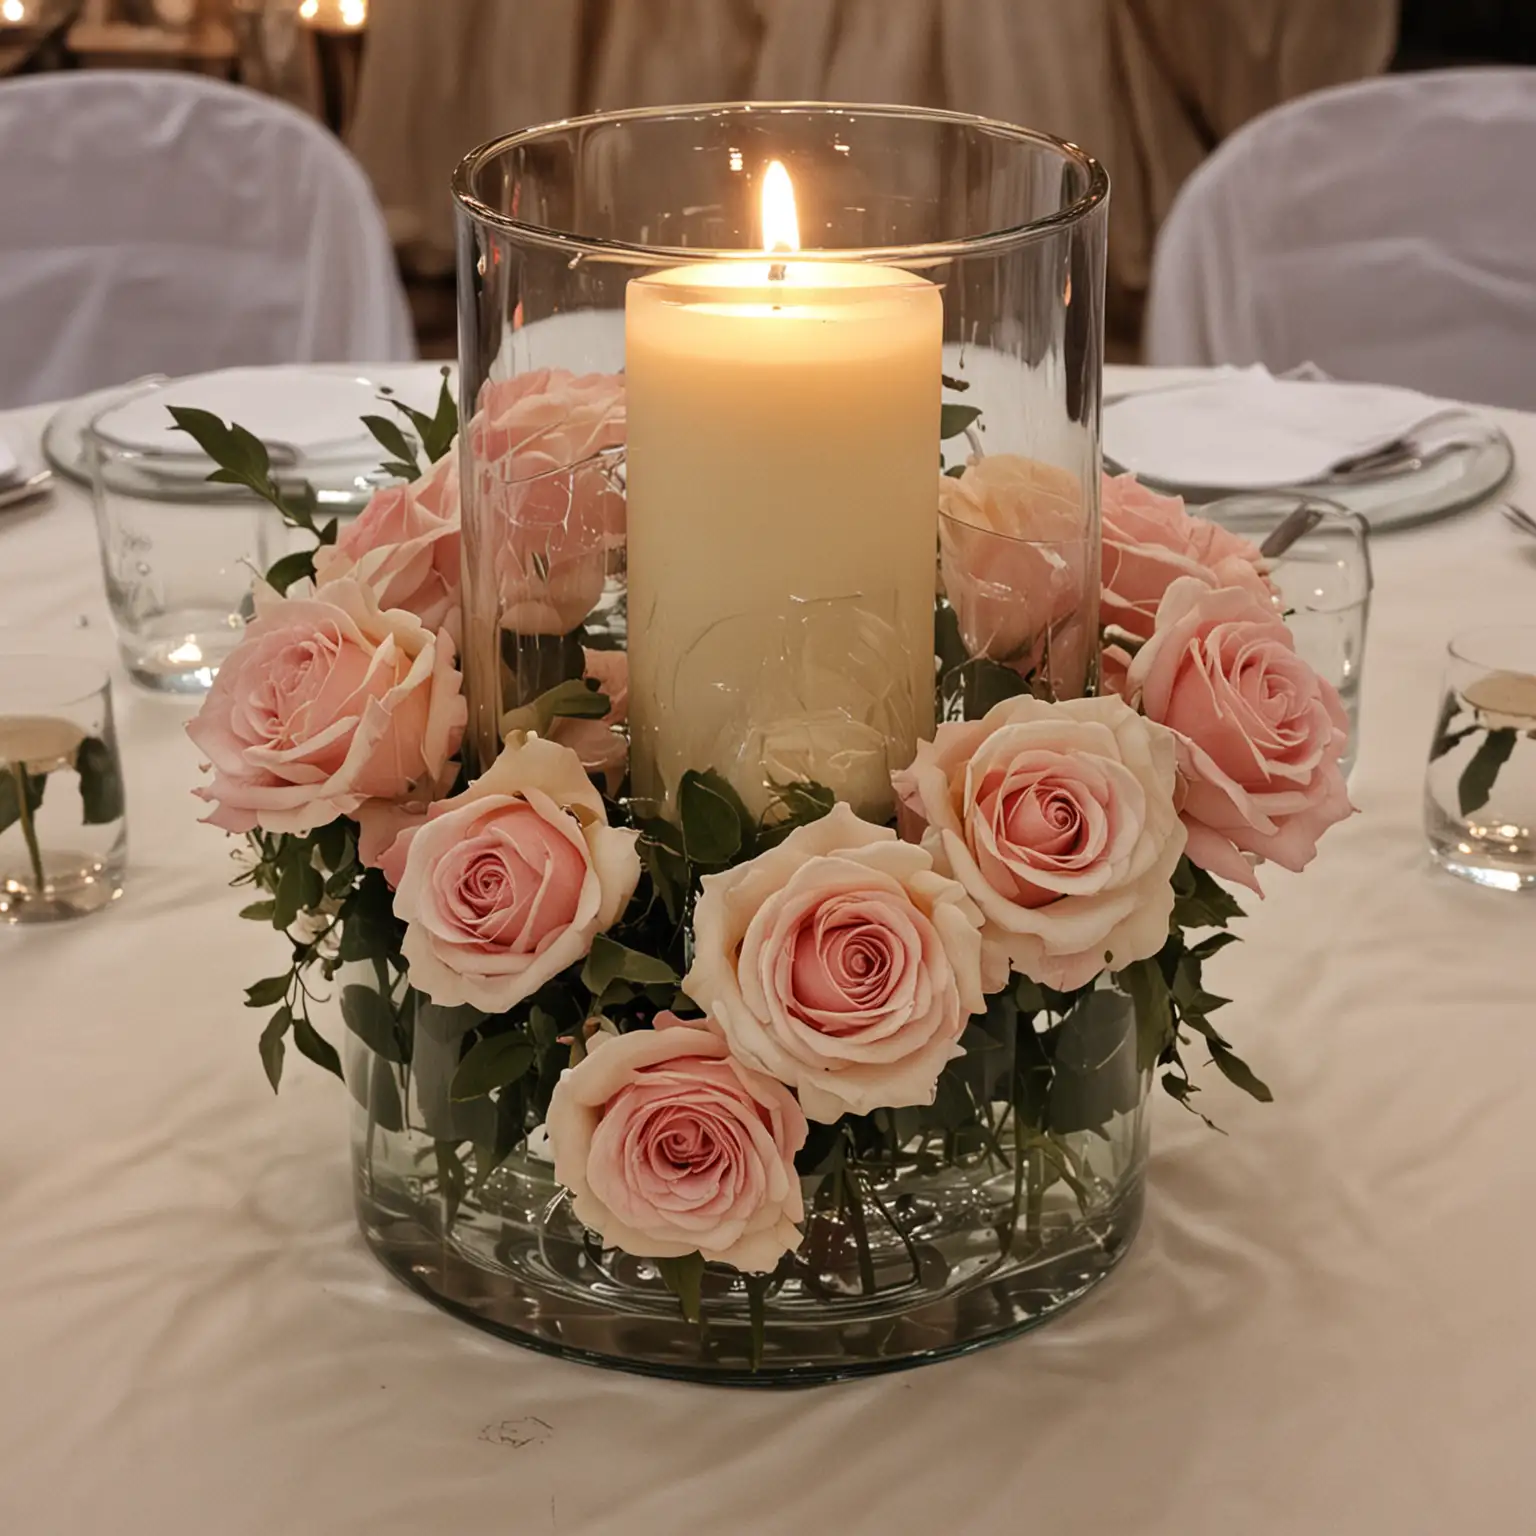 wedding centerpiece using large and wide cylinder glass vase holding a few votive candles and the vase is decorated with a vintage ring of roses around the outside of the cylinder vase